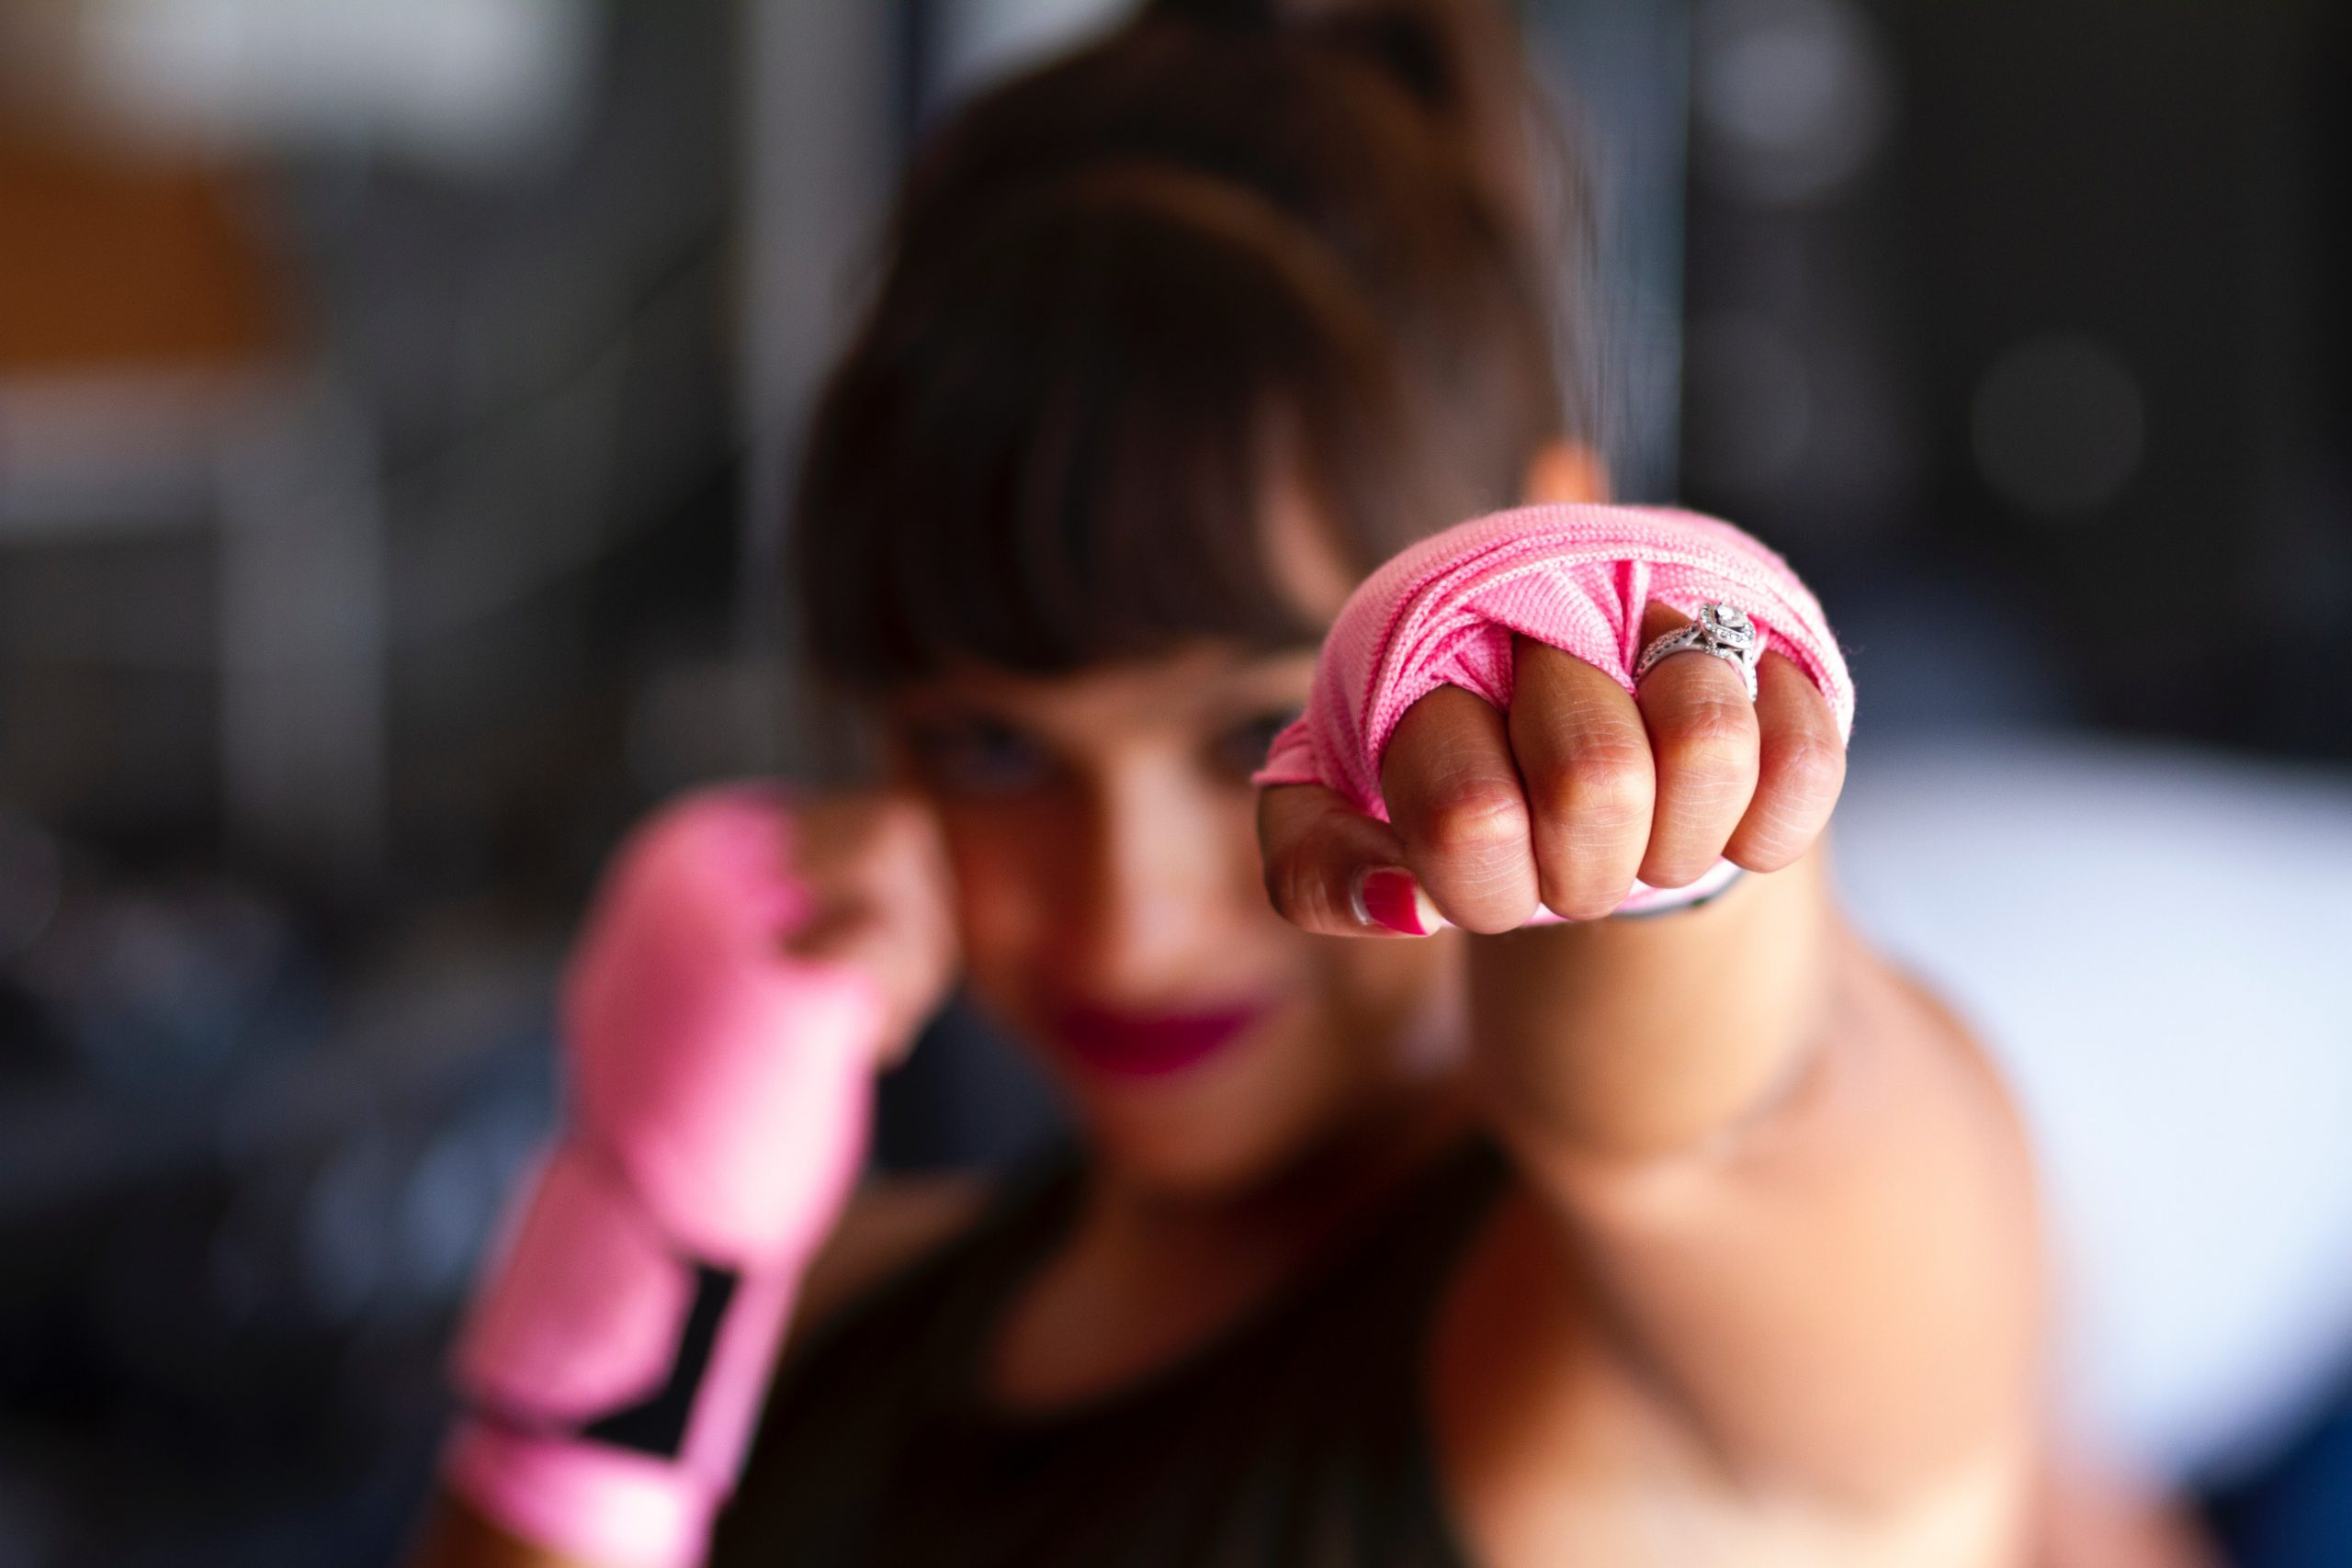 Woman with pink hand wraps air boxing; wraps are pink to represent the Pink Ribbons movement.